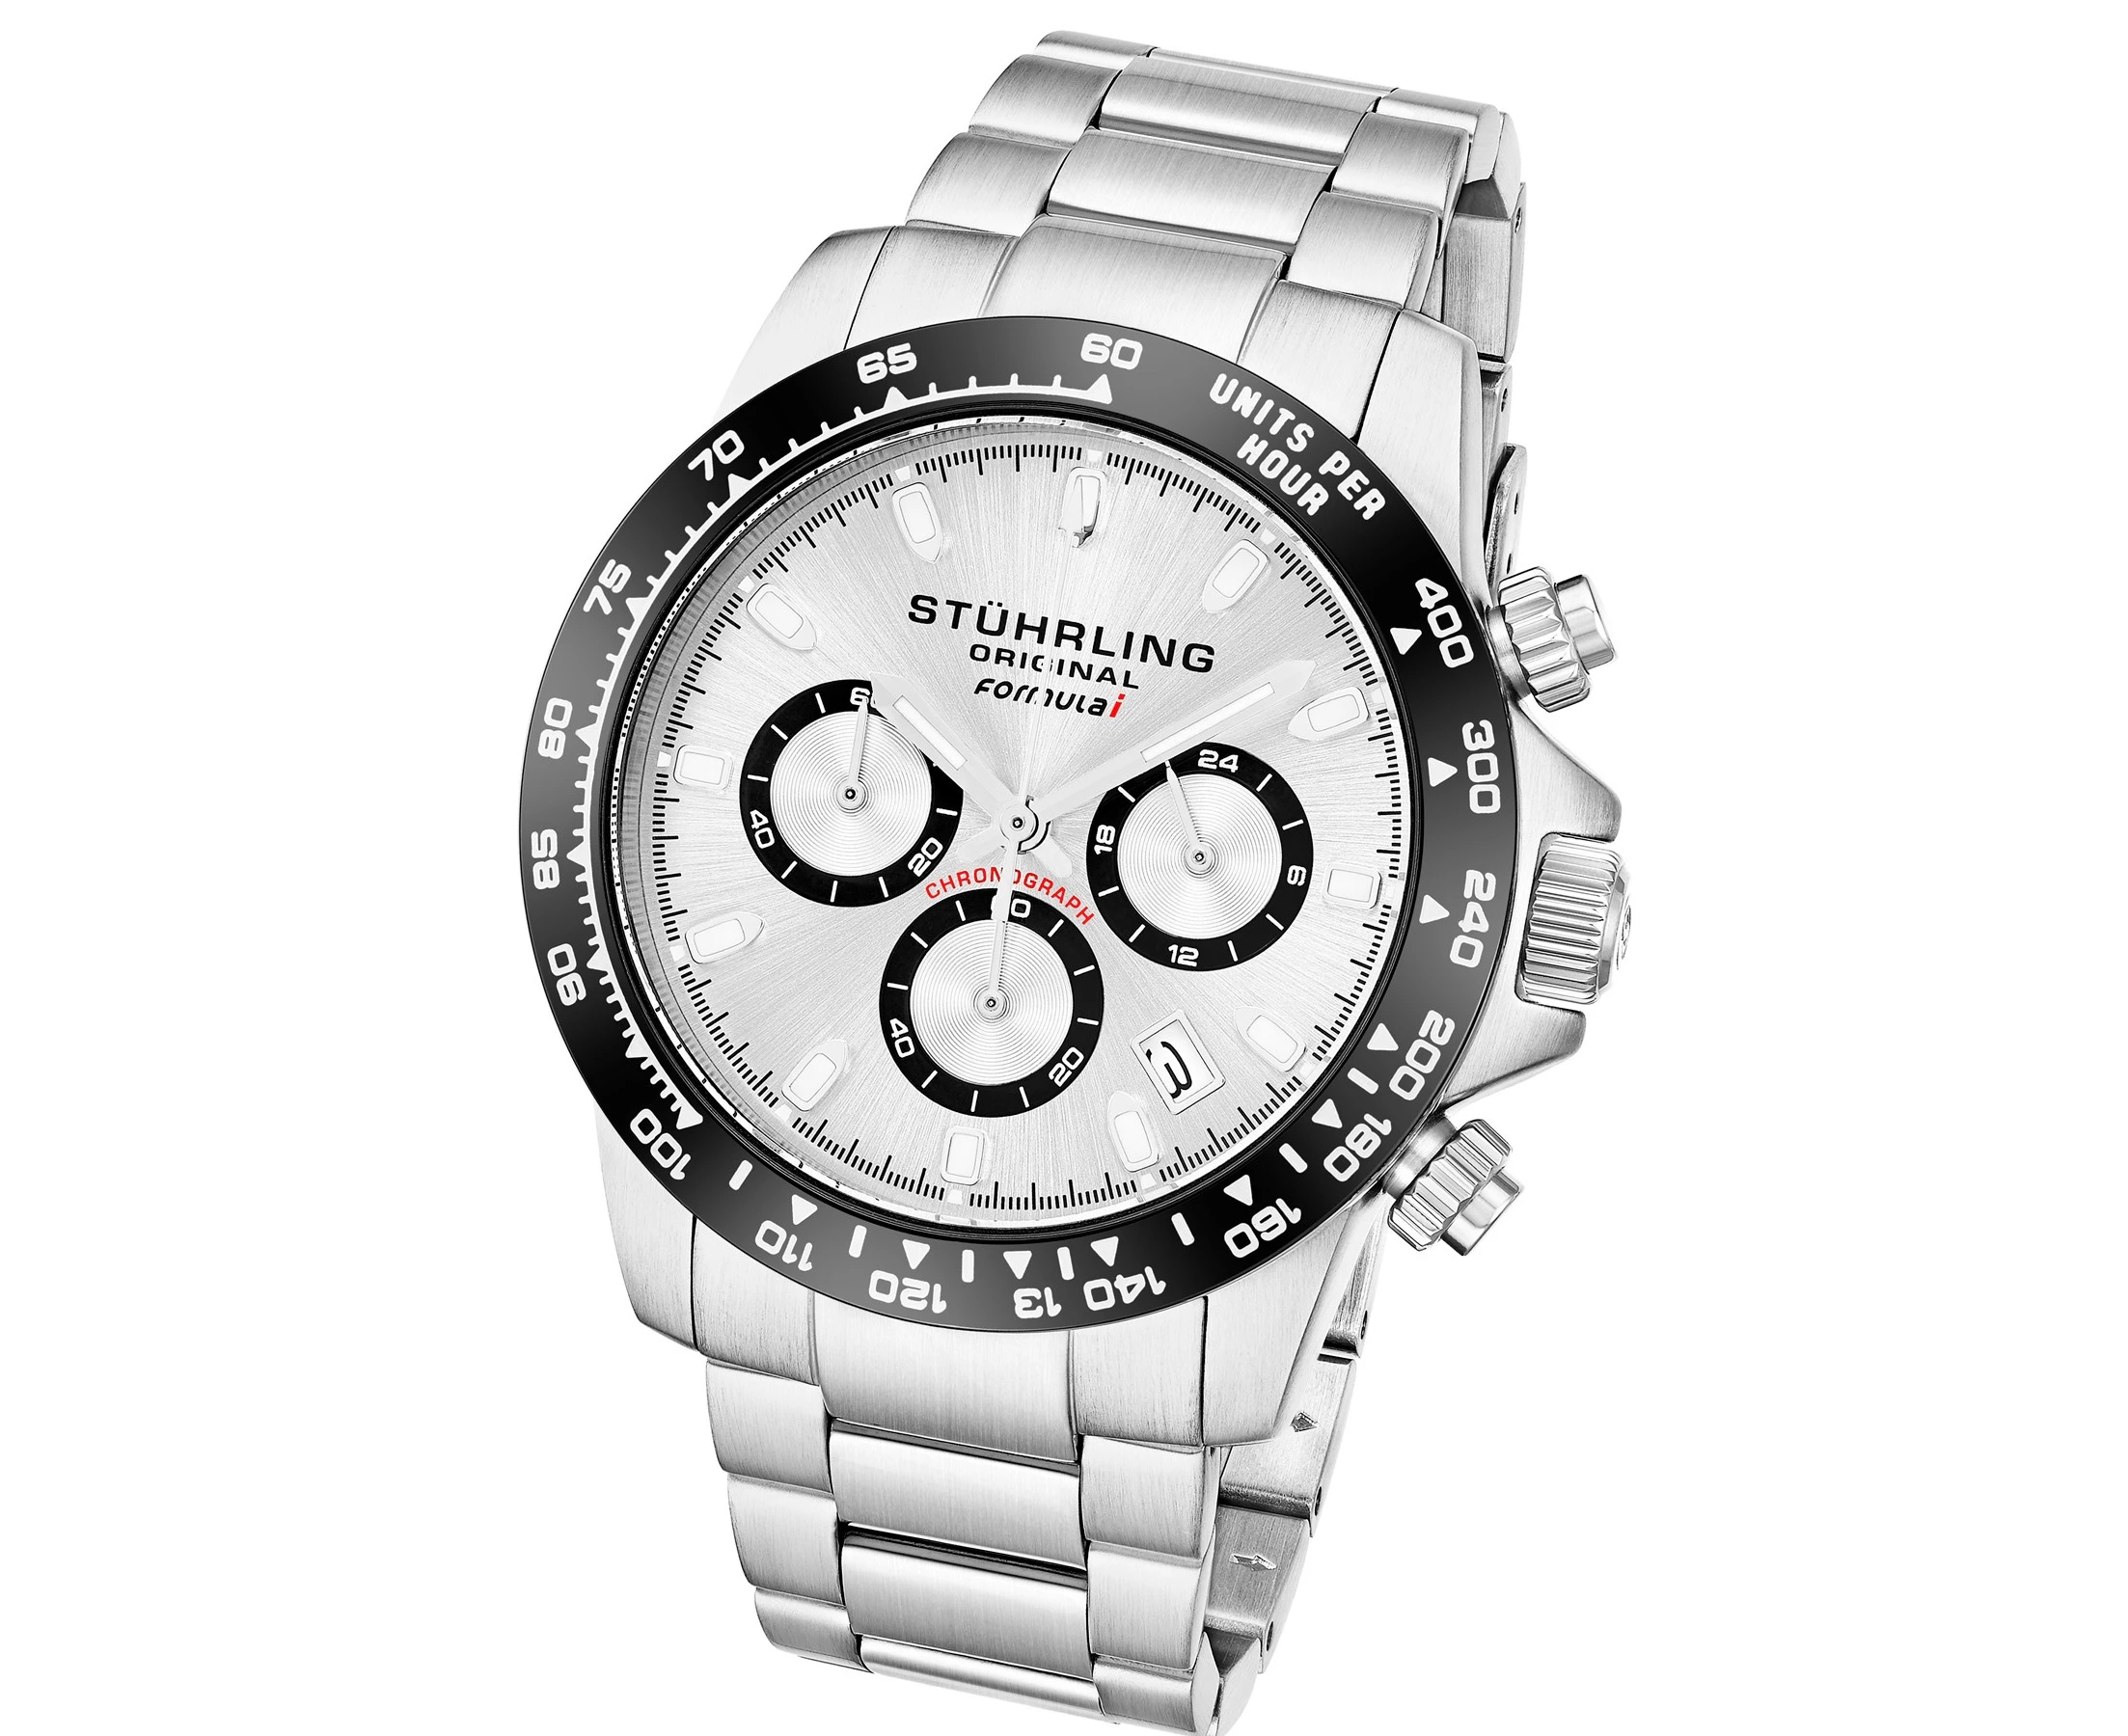 GUESS Men's 45mm Atlas Stainless Steel Chronograph Watch - Silver